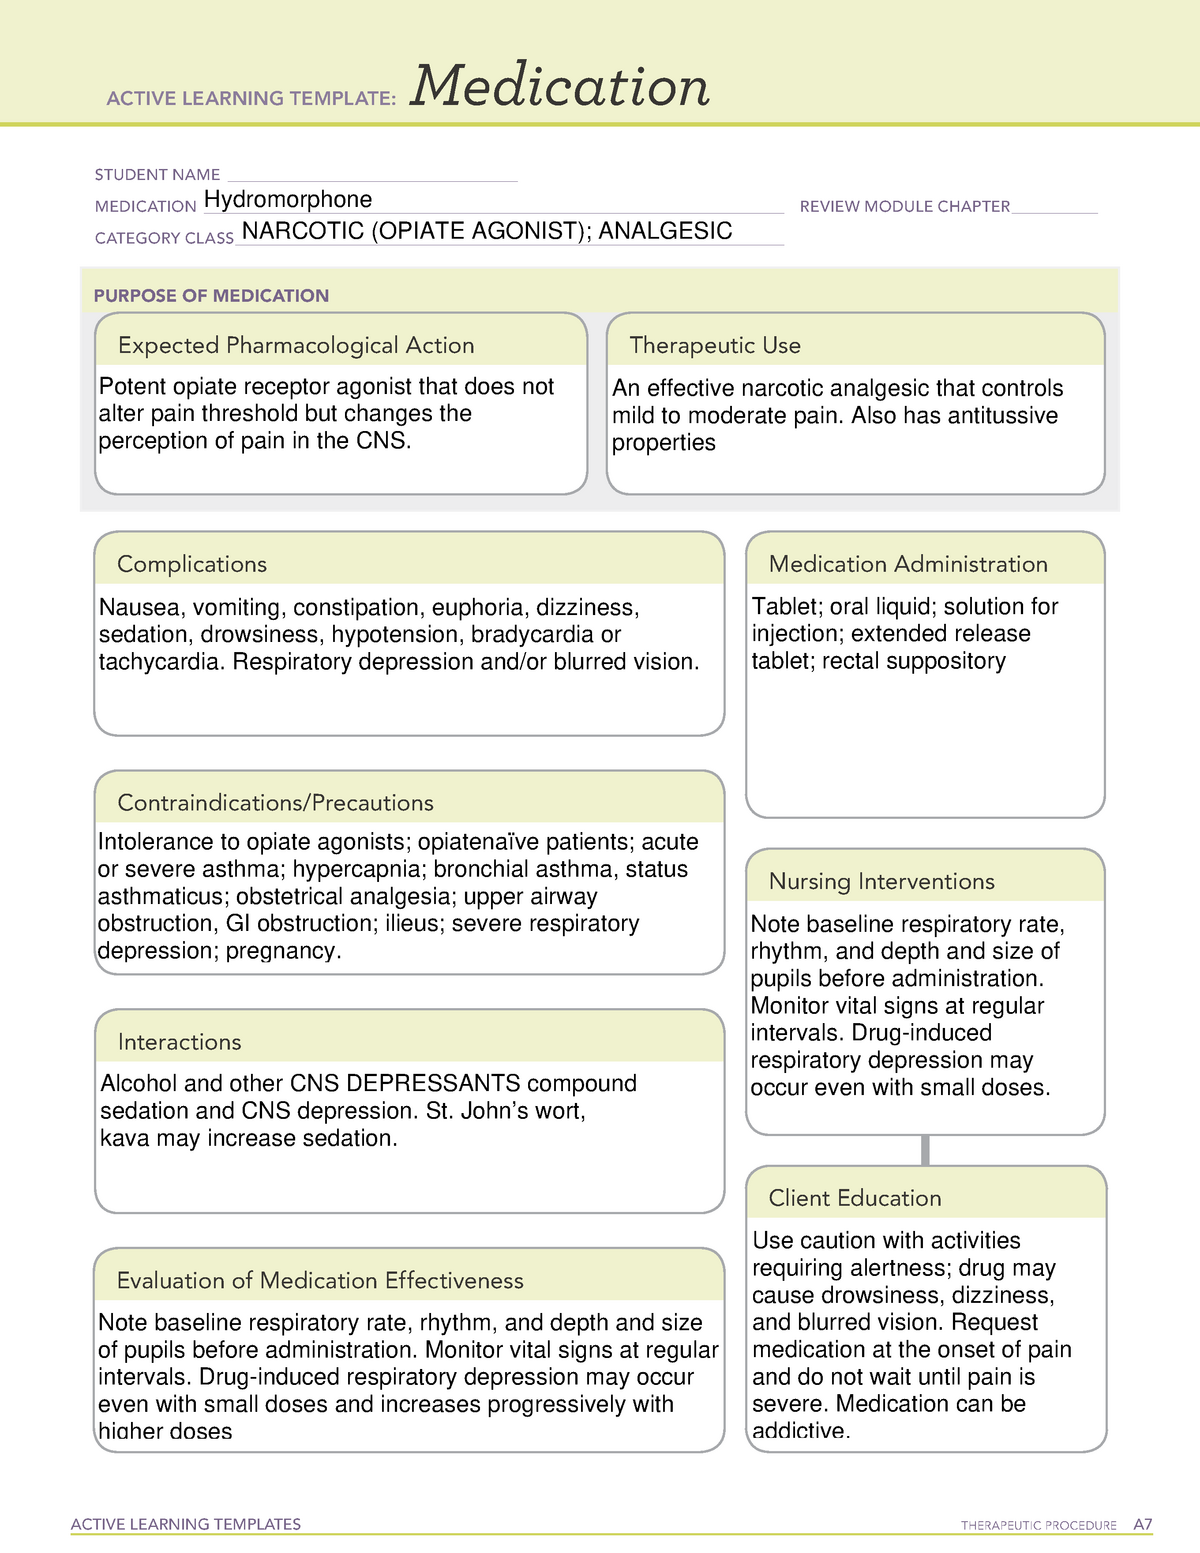 Hydromorphone Med card ACTIVE LEARNING TEMPLATES THERAPEUTIC